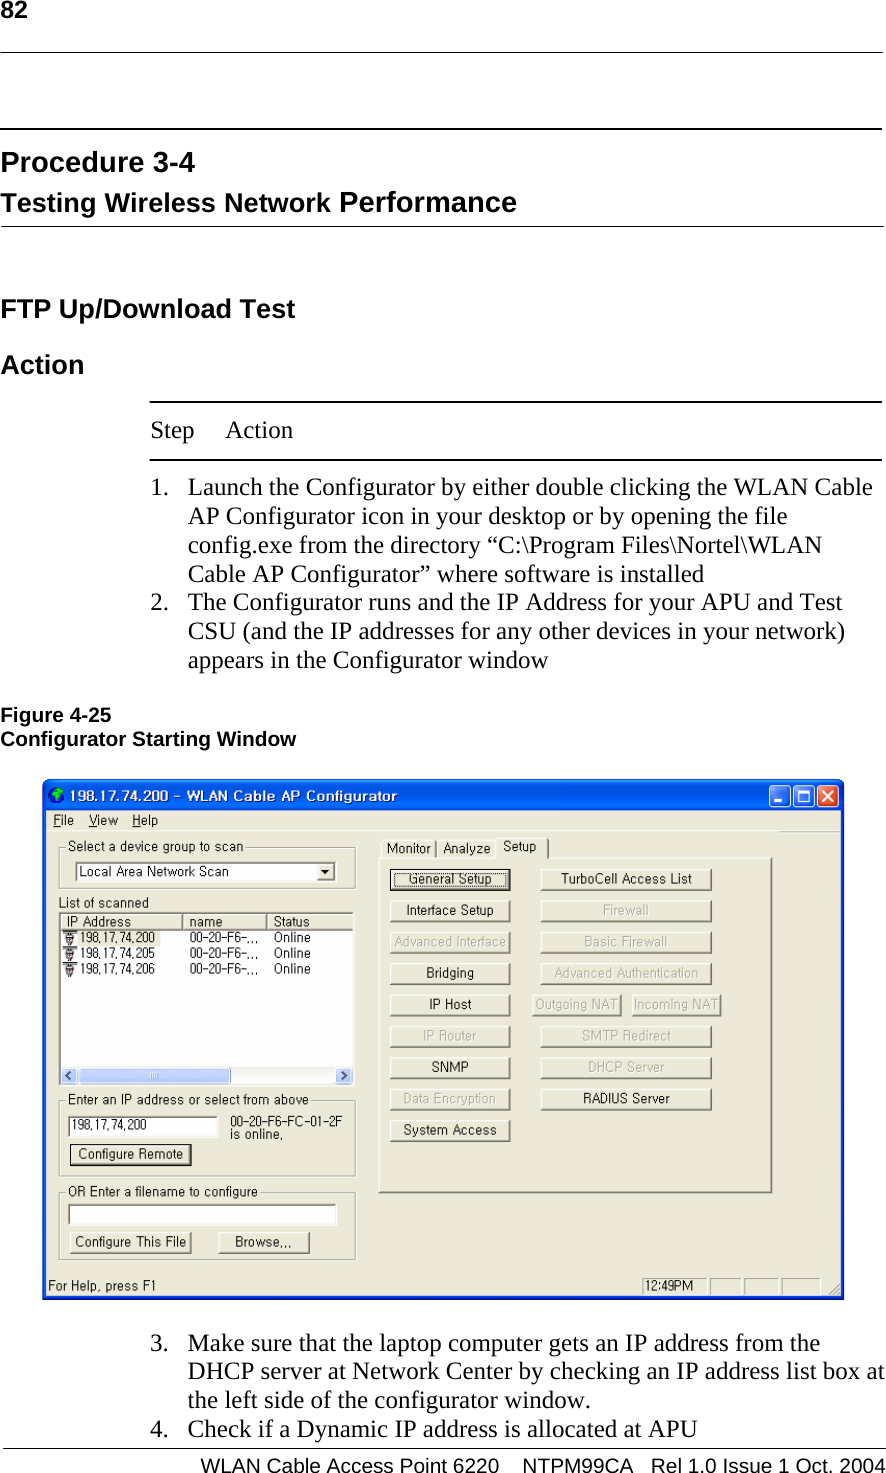   82    Procedure 3-4 Testing Wireless Network Performance   FTP Up/Download Test  Action  Step Action  1. Launch the Configurator by either double clicking the WLAN Cable AP Configurator icon in your desktop or by opening the file config.exe from the directory “C:\Program Files\Nortel\WLAN Cable AP Configurator” where software is installed  2. The Configurator runs and the IP Address for your APU and Test CSU (and the IP addresses for any other devices in your network) appears in the Configurator window   Figure 4-25 Configurator Starting Window    3. Make sure that the laptop computer gets an IP address from the DHCP server at Network Center by checking an IP address list box at the left side of the configurator window. 4. Check if a Dynamic IP address is allocated at APU  WLAN Cable Access Point 6220    NTPM99CA   Rel 1.0 Issue 1 Oct. 2004